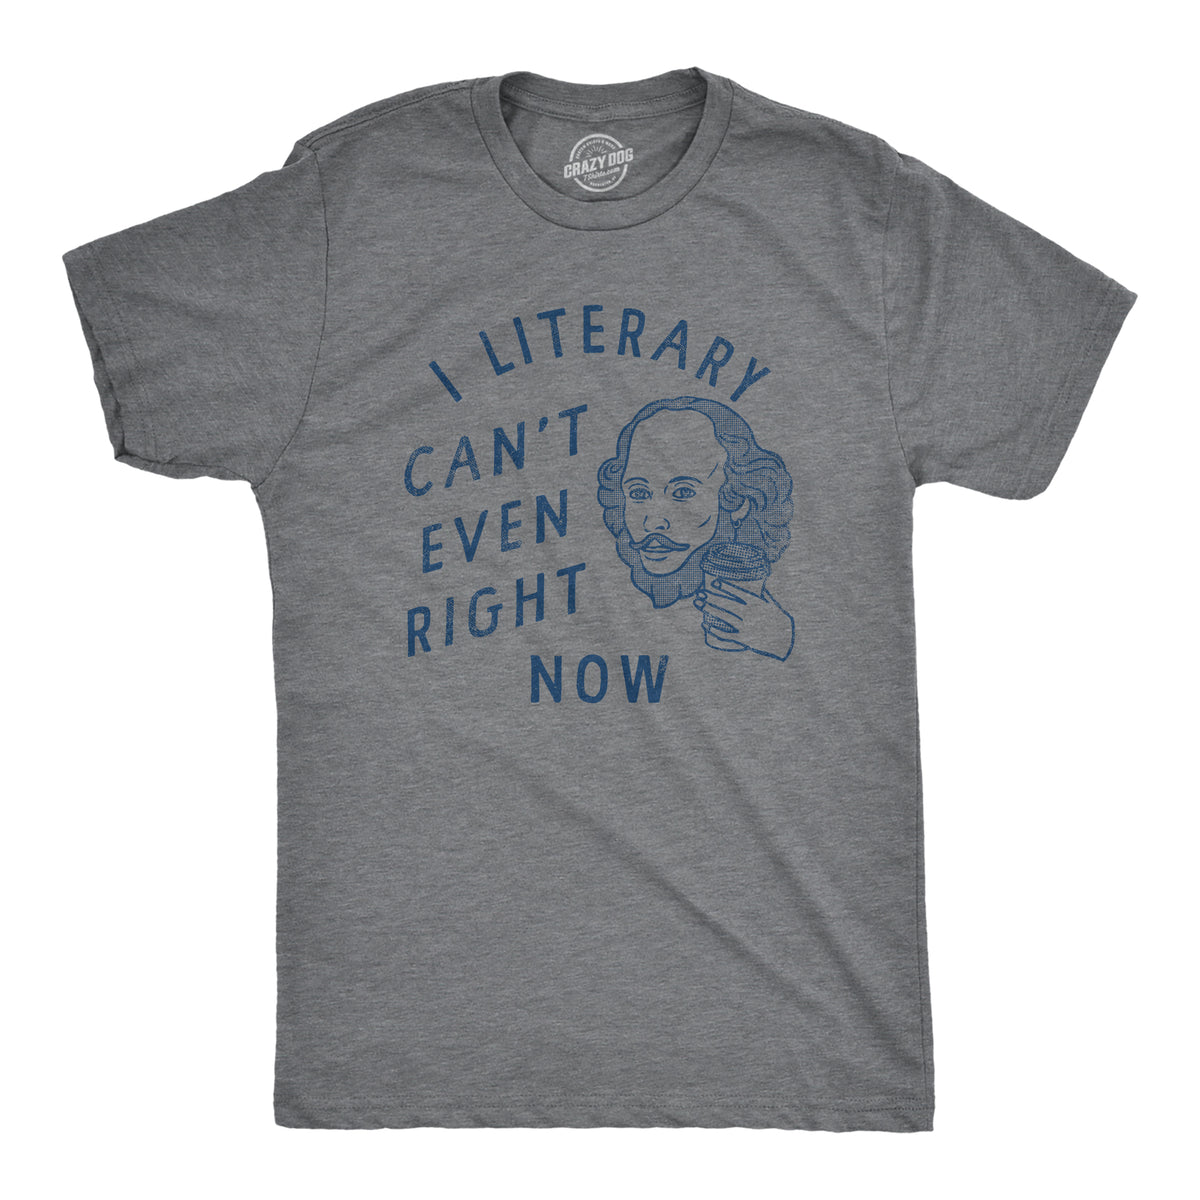 Funny Dark Heather Grey - LITERARY I Literary Cant Even Right Now Mens T Shirt Nerdy Nerdy sarcastic Tee